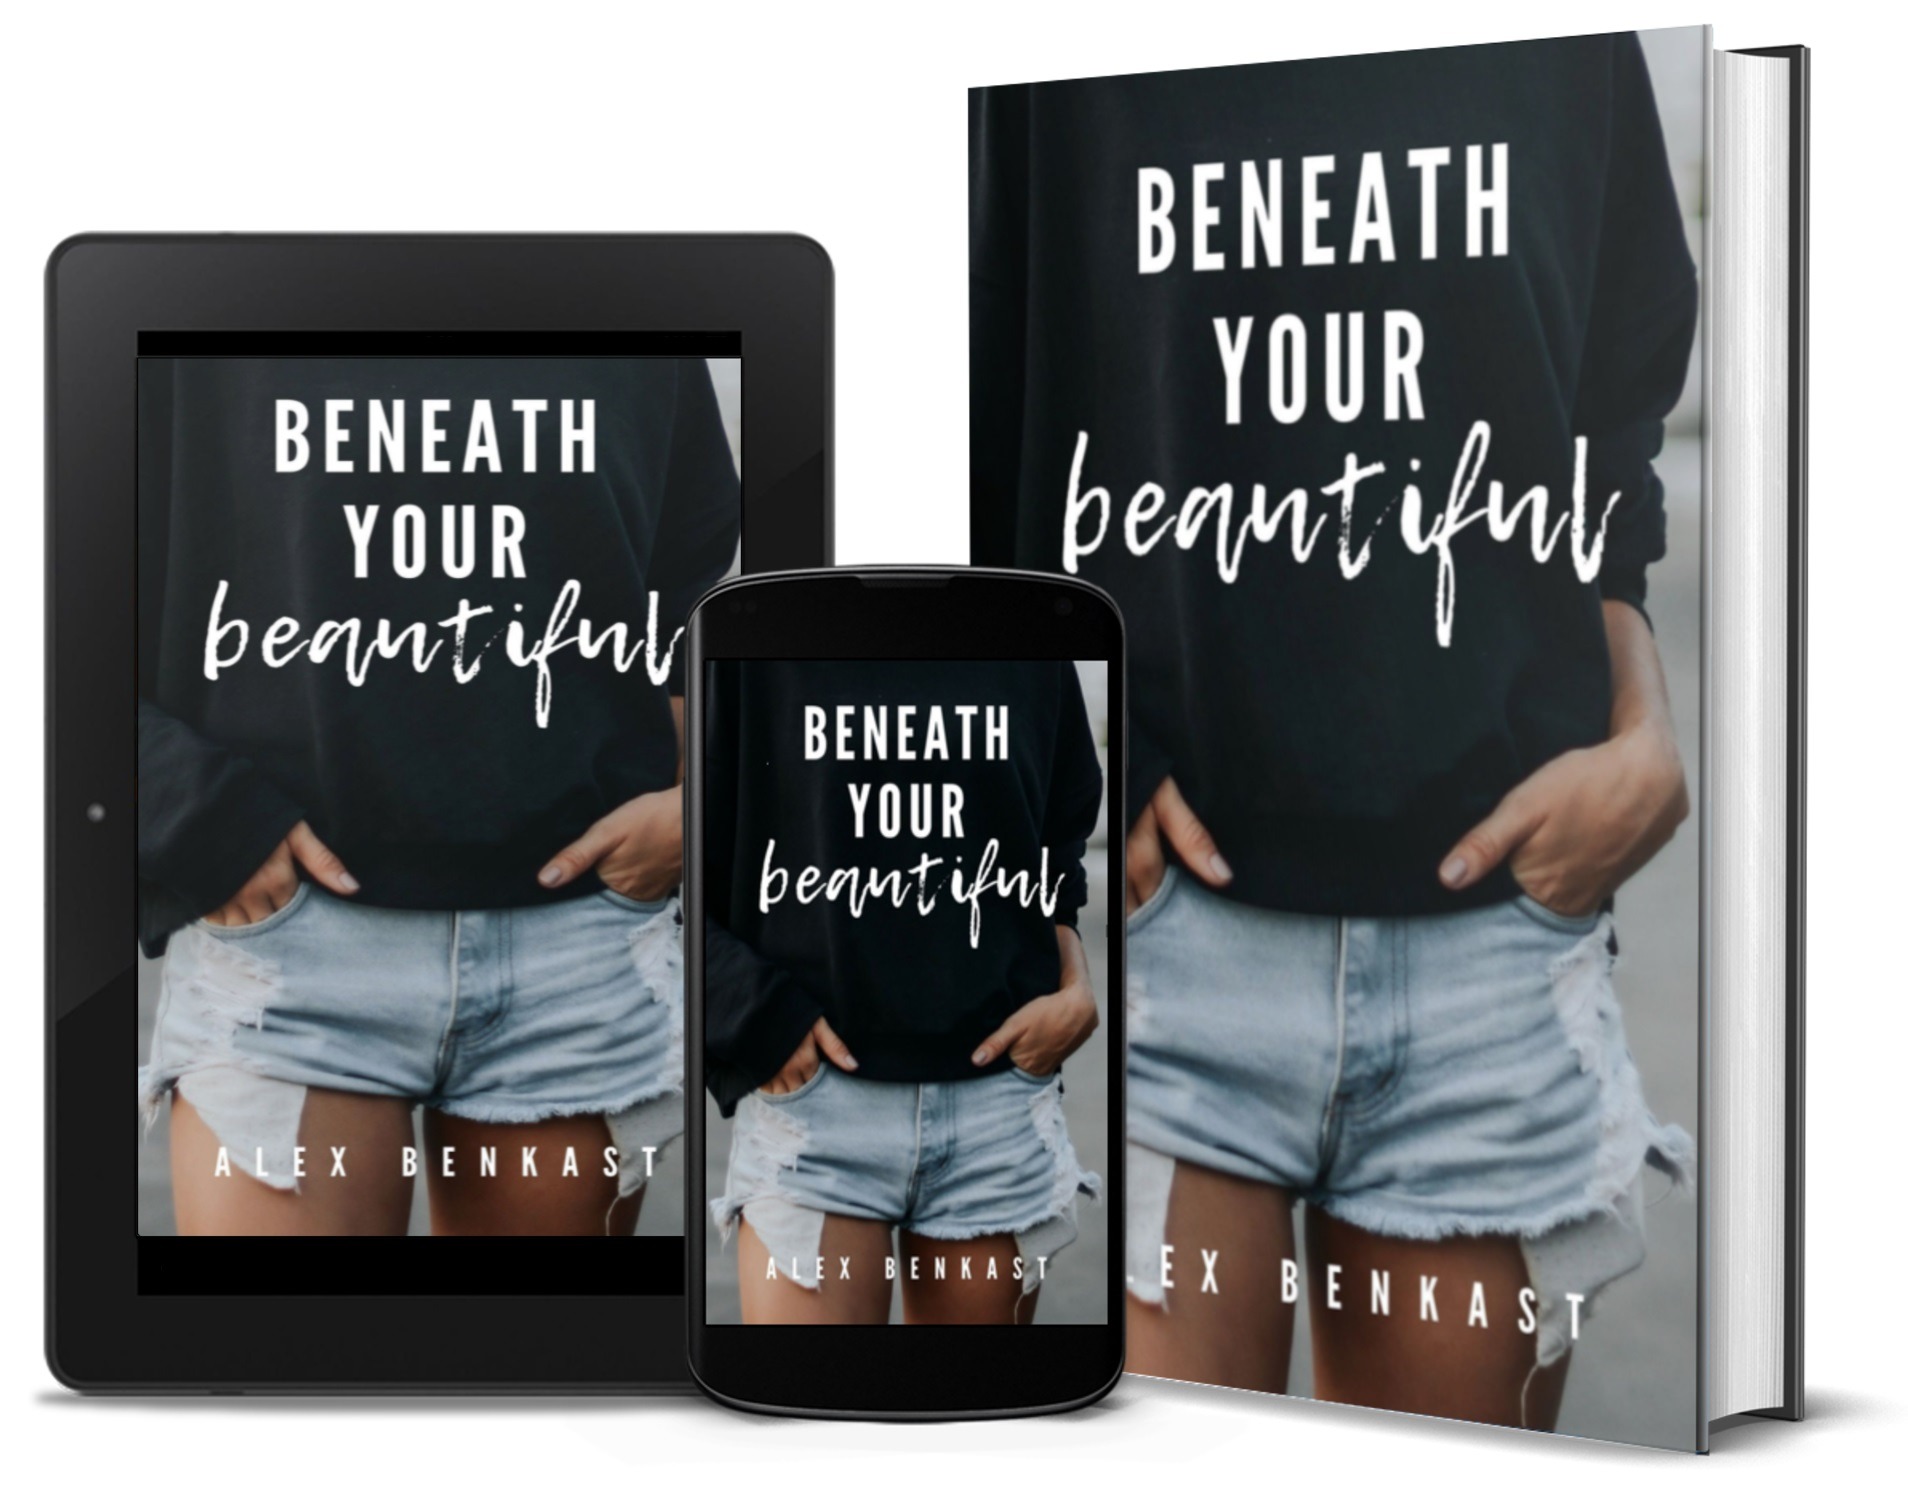 Beneath Your Beautiful by Alex Benkast. Polished by book editor Ashleigh Bonner.